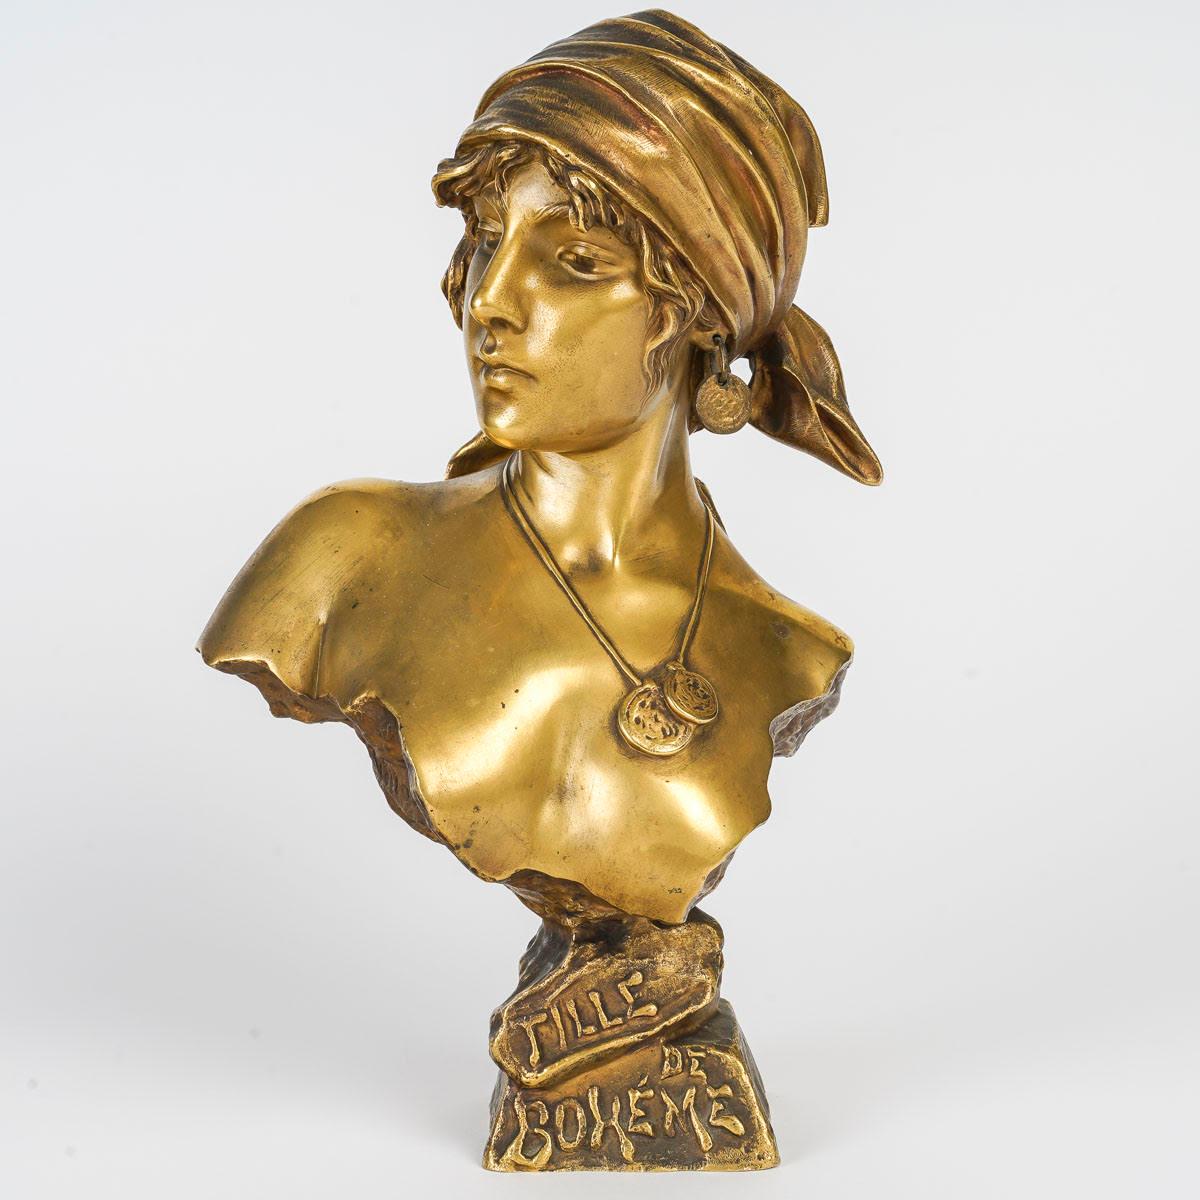 French Gilt Bronze Sculpture by Emmanuel Villanis, Early 20th Century.